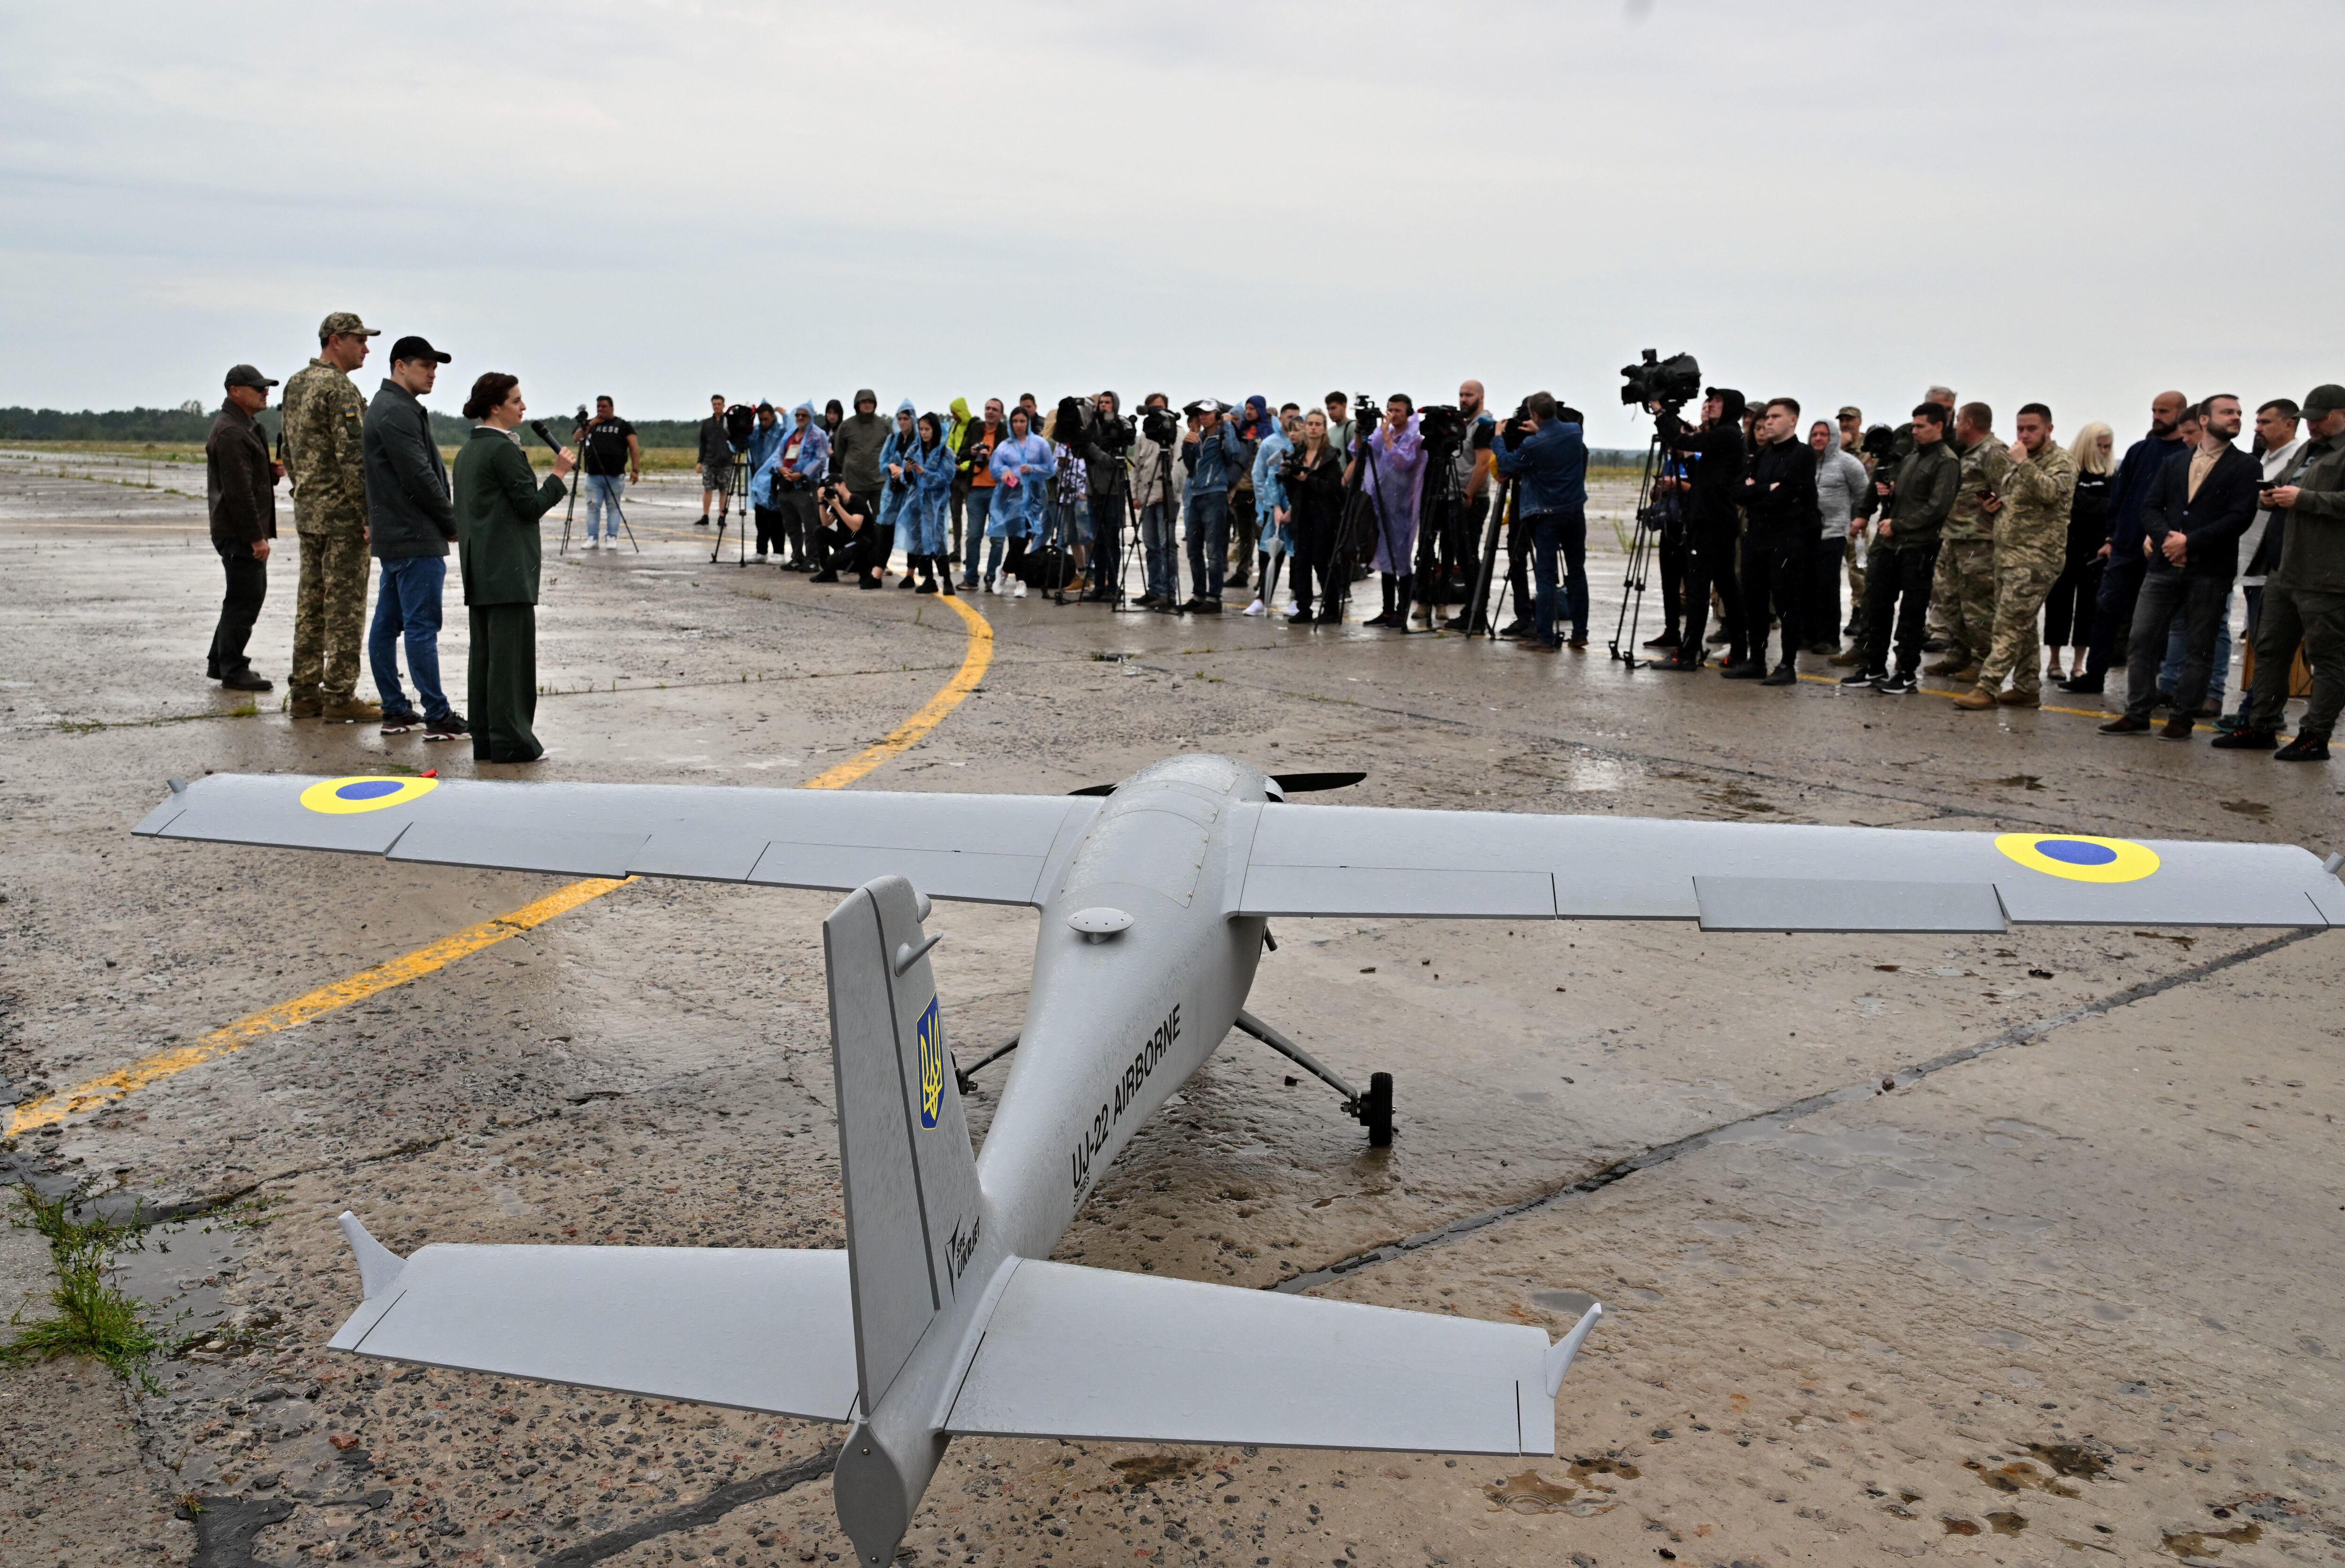 Journalists attend the unveiling of a UJ-22 Airborne reconnaissance drone in Kiev, Ukraine, on August 2, 2022, before it is sent to the front lines of the war.  (Photo by Sergei SUPINSKY / AFP).